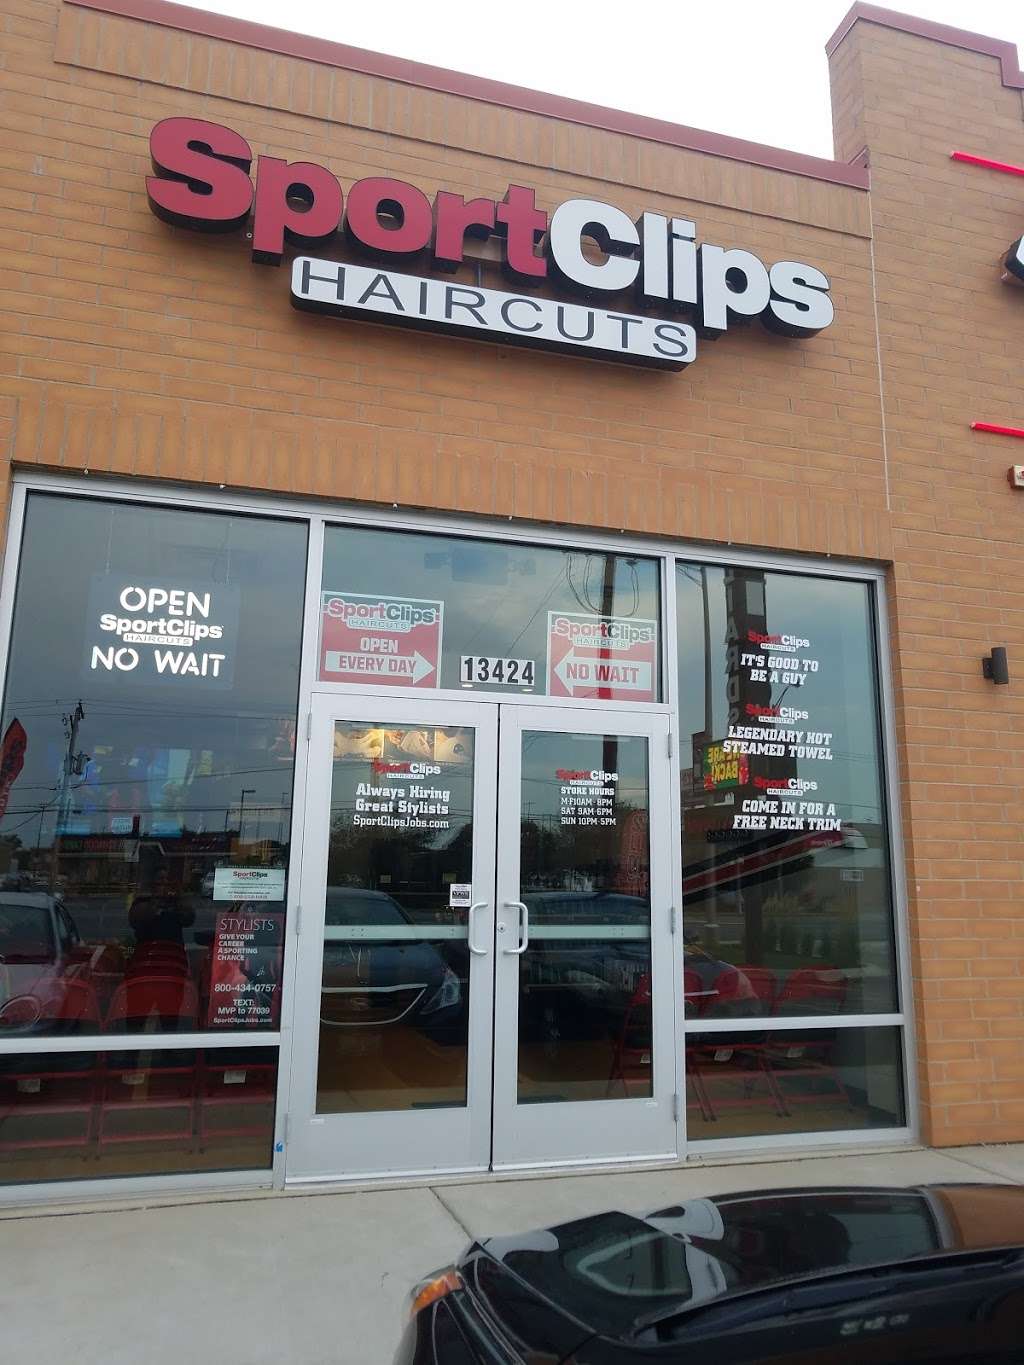 A069c7bfb4f024301dd997da4fc73b63  United States Illinois Cook County Worth Township Crestwood South Cicero Avenue 13424 Sport Clips Haircuts Of Crestwood 708 631 3000 